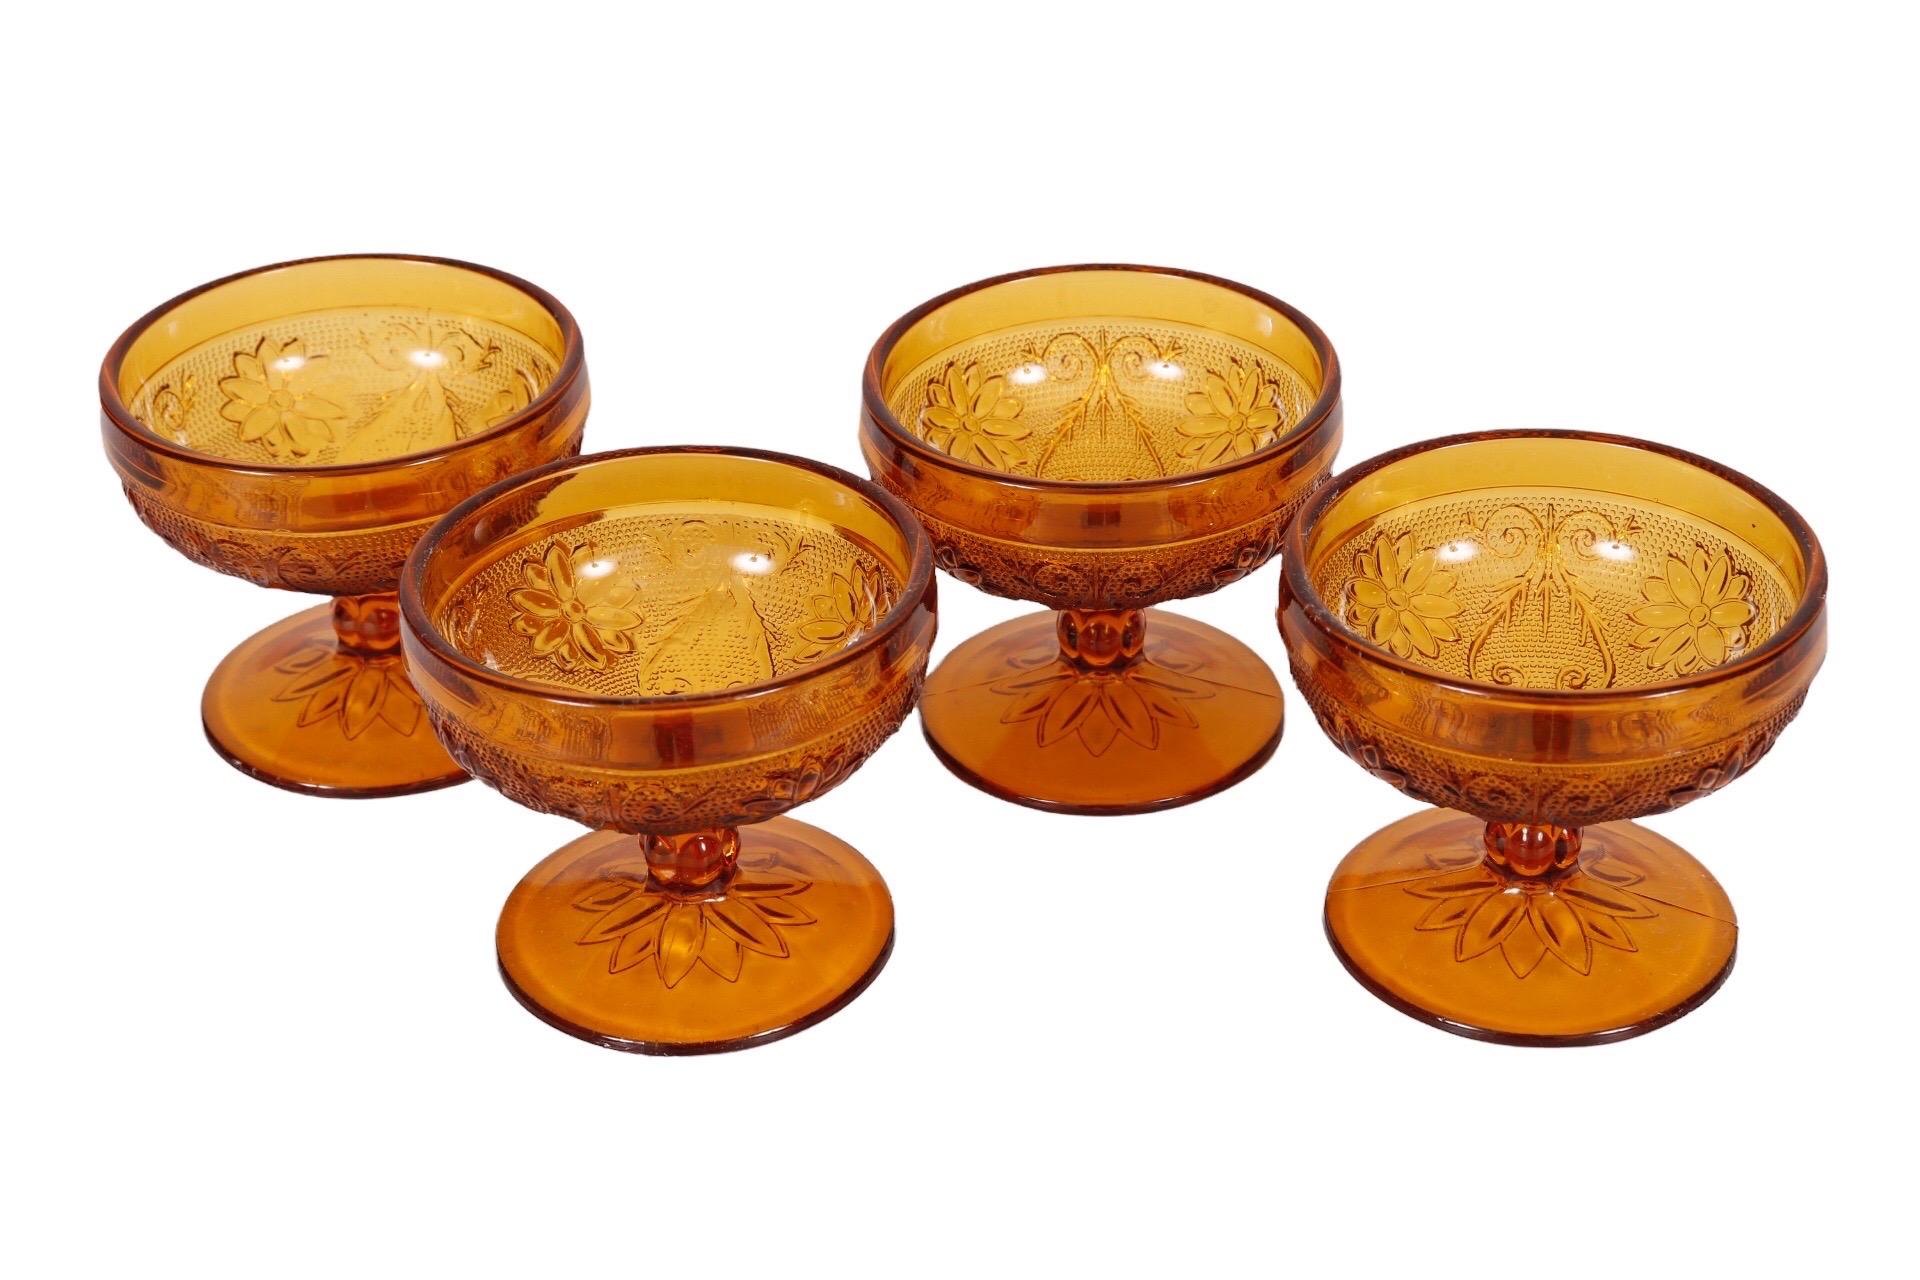 A set of four Tiara amber glass dessert bowls in the Sandwich pattern. Made by Indiana Glass Company, circa 1970. Dimensions per bowl. 